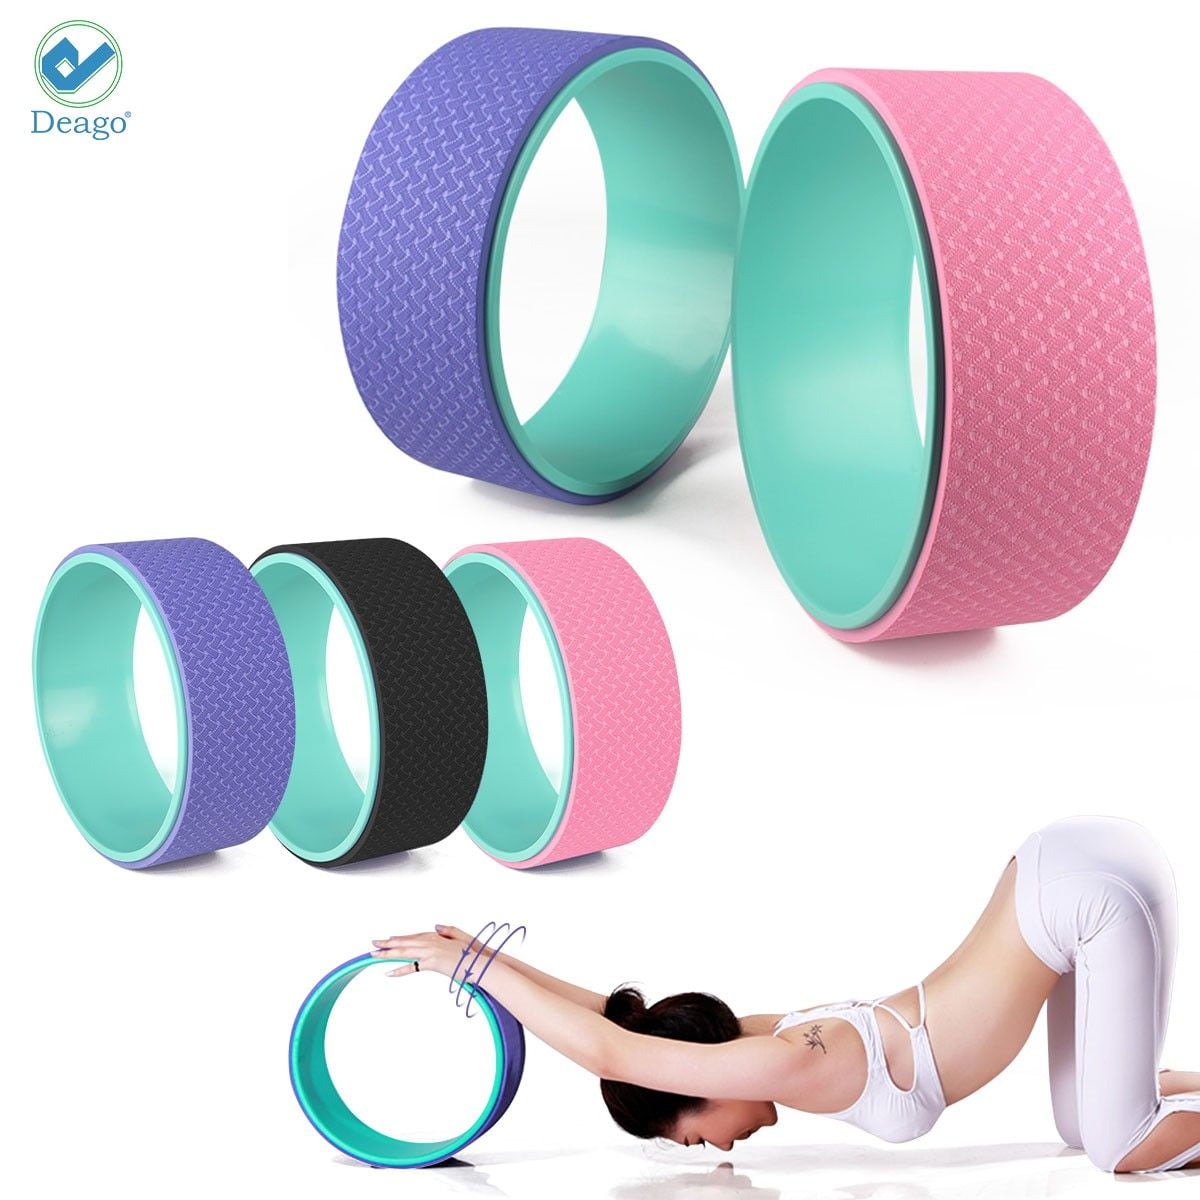 Strongest, Most Comfortable Dharma Yoga Roller - Improve Yoga, Stretching, Reduce Back Pain - slim - Guide Included Yoga Wheel 13 